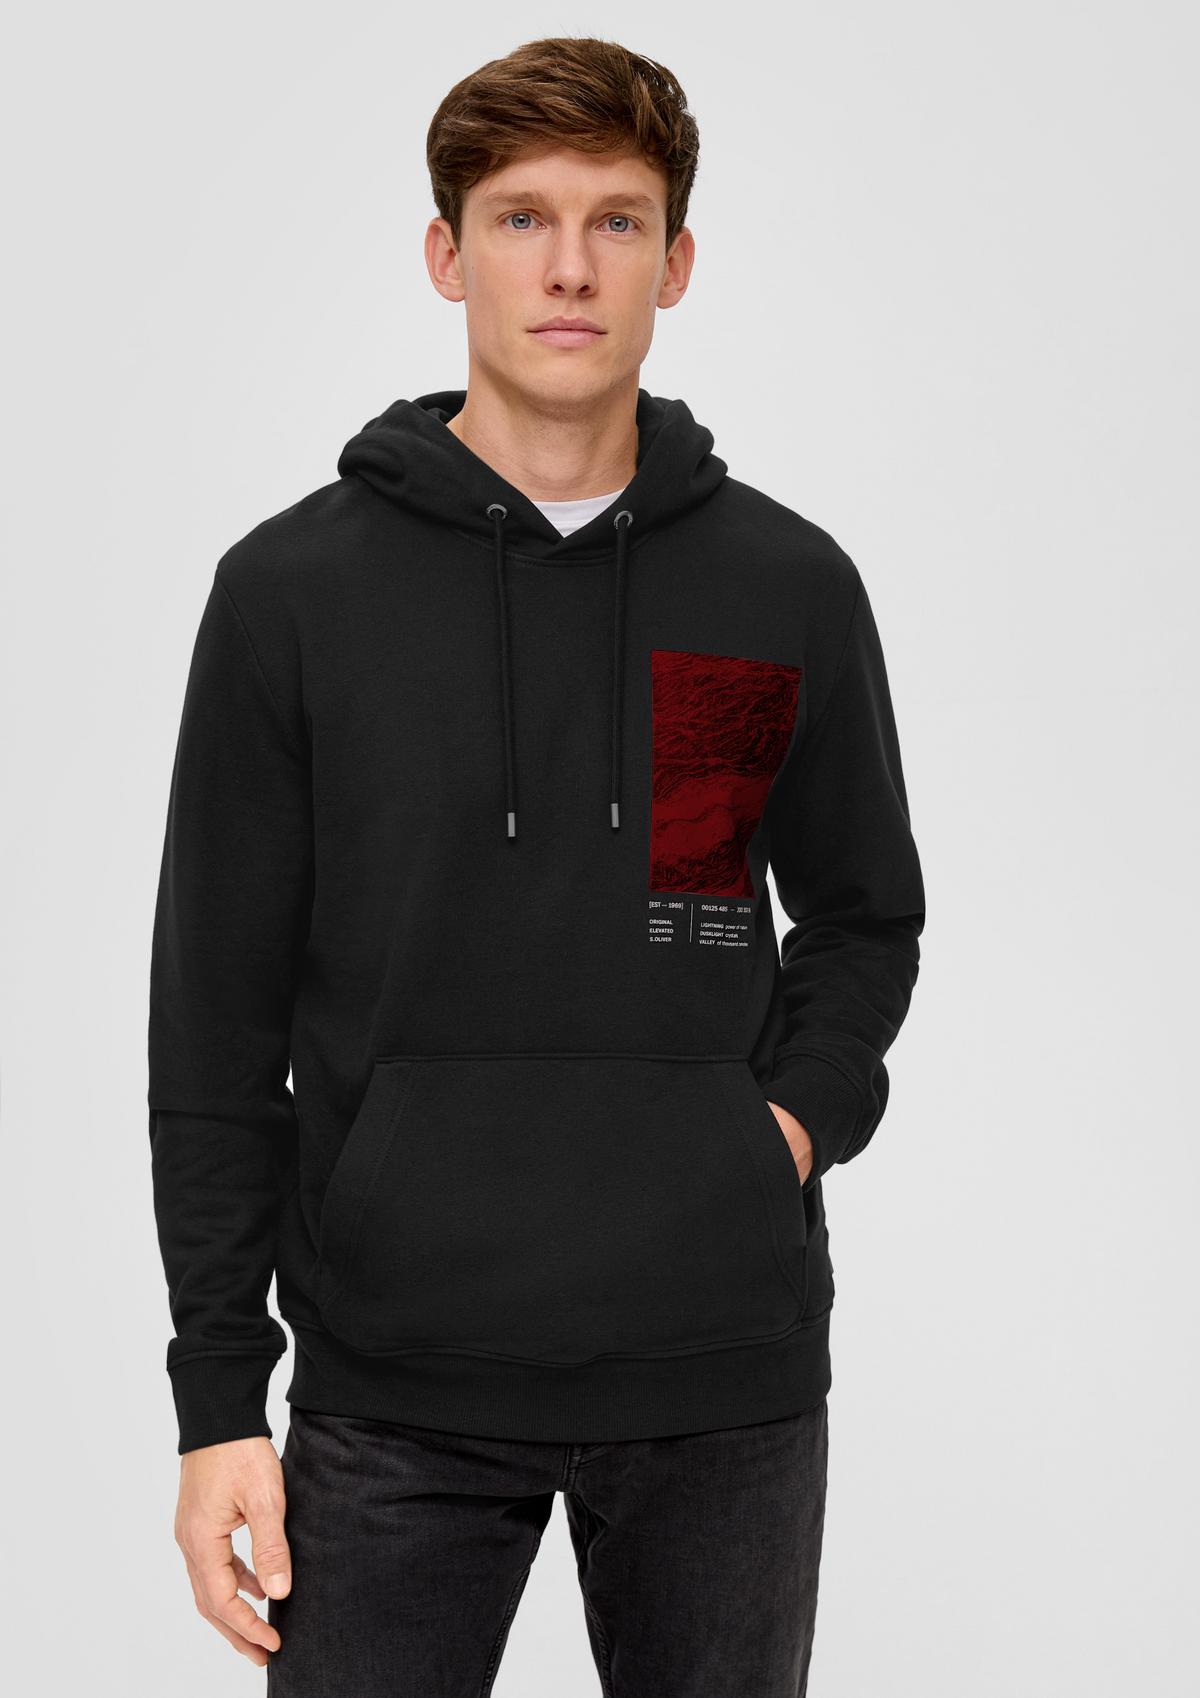 Sweatshirt with a front - print black